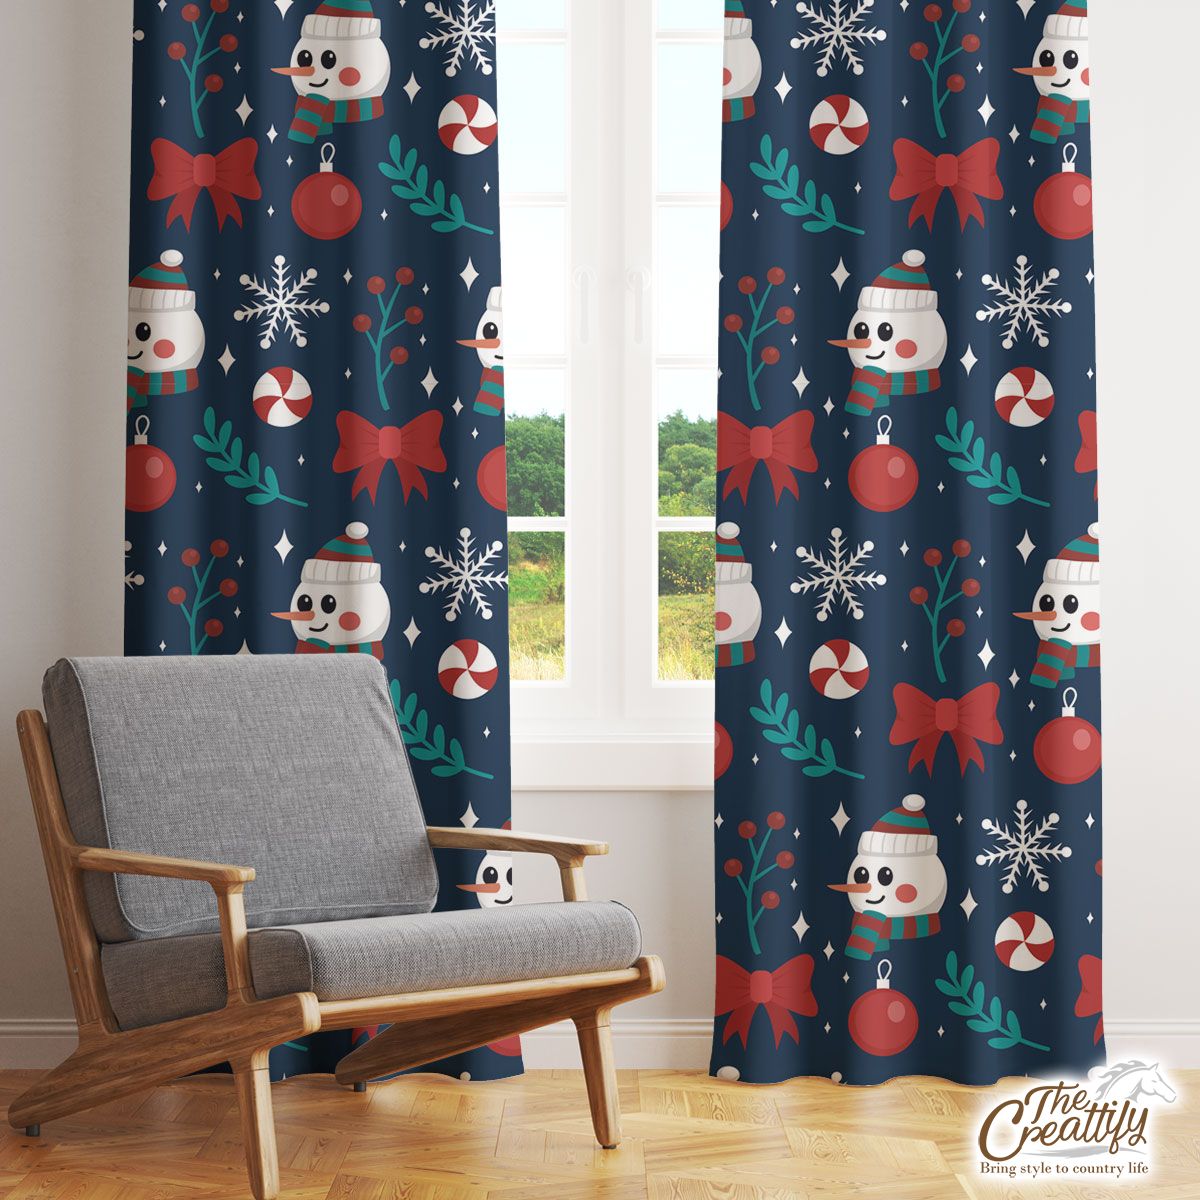 Snowman Face With Baubles And Christmas Bow Window Curtain